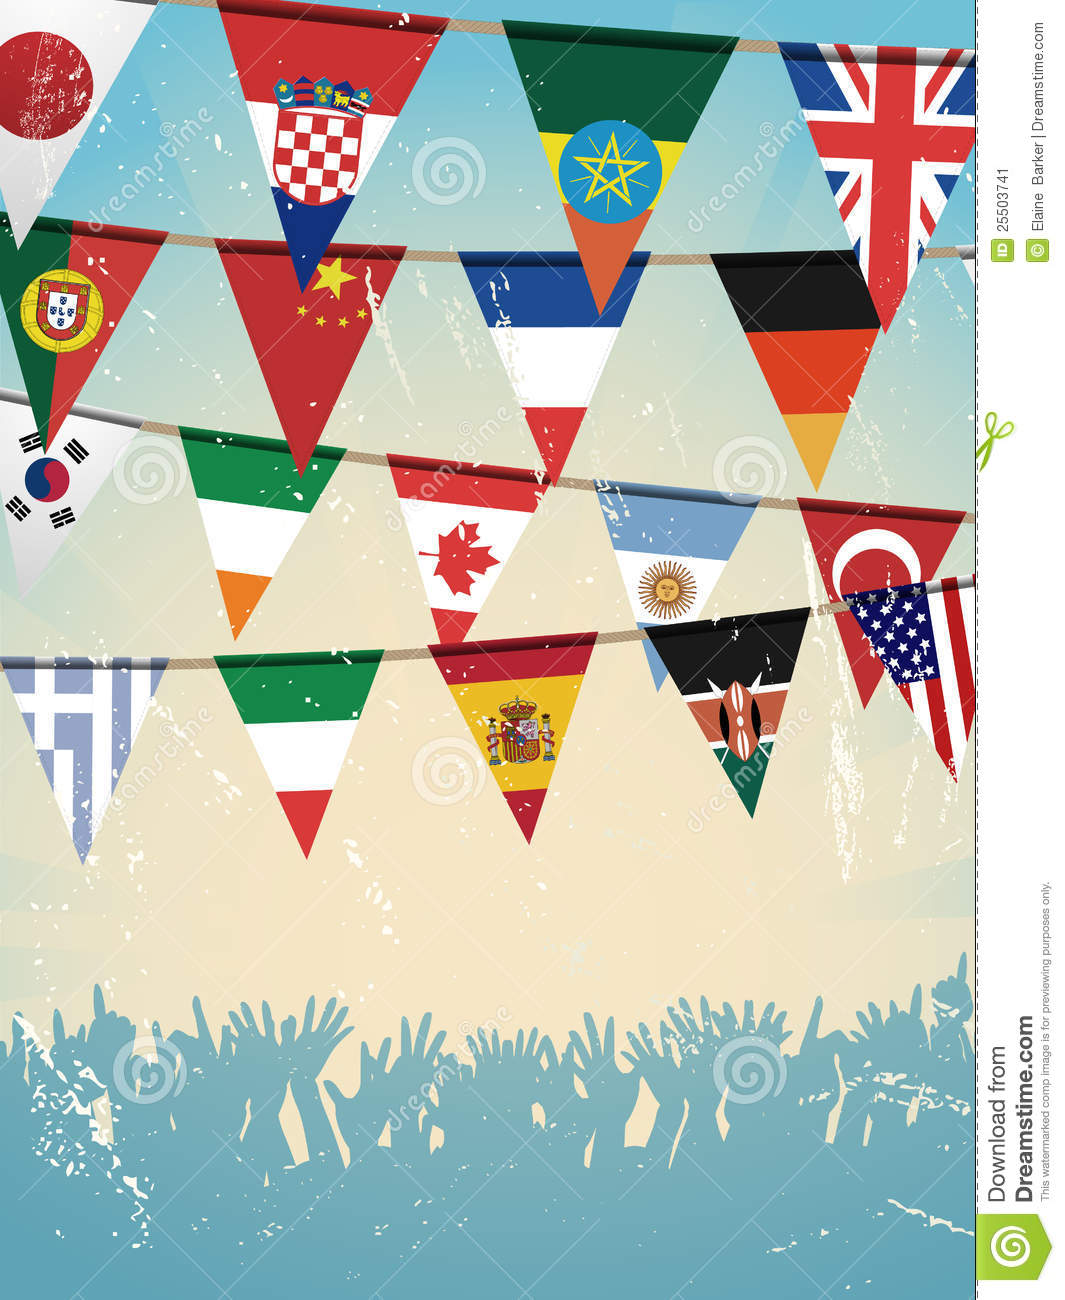 International Flags Clip Art World Flag Bunting And Crowd